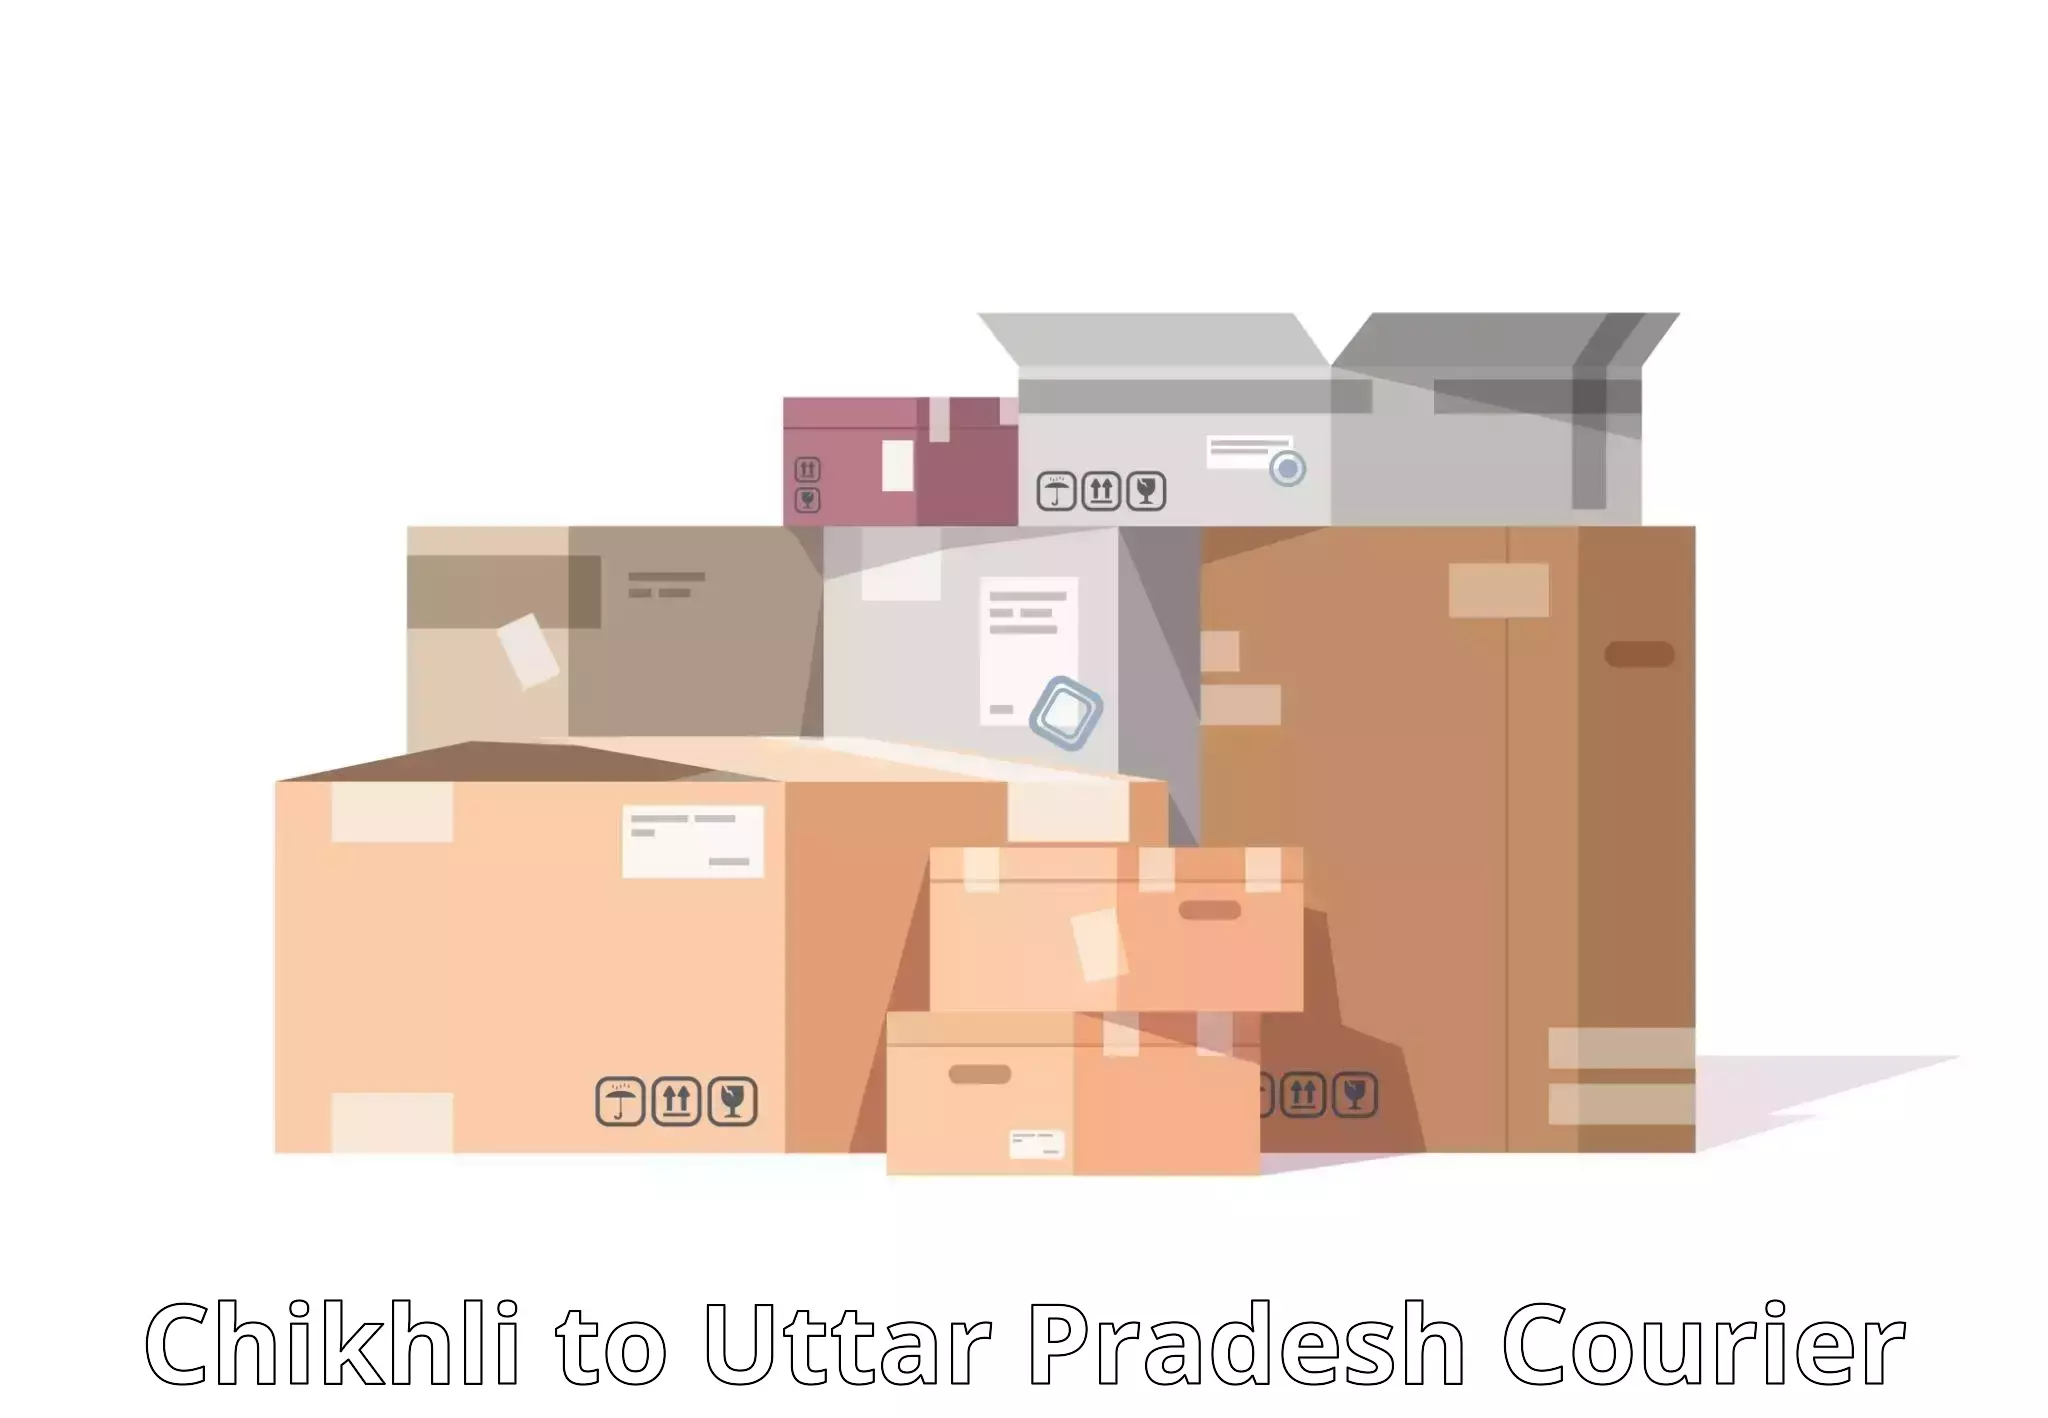 Streamlined delivery processes Chikhli to Meerut